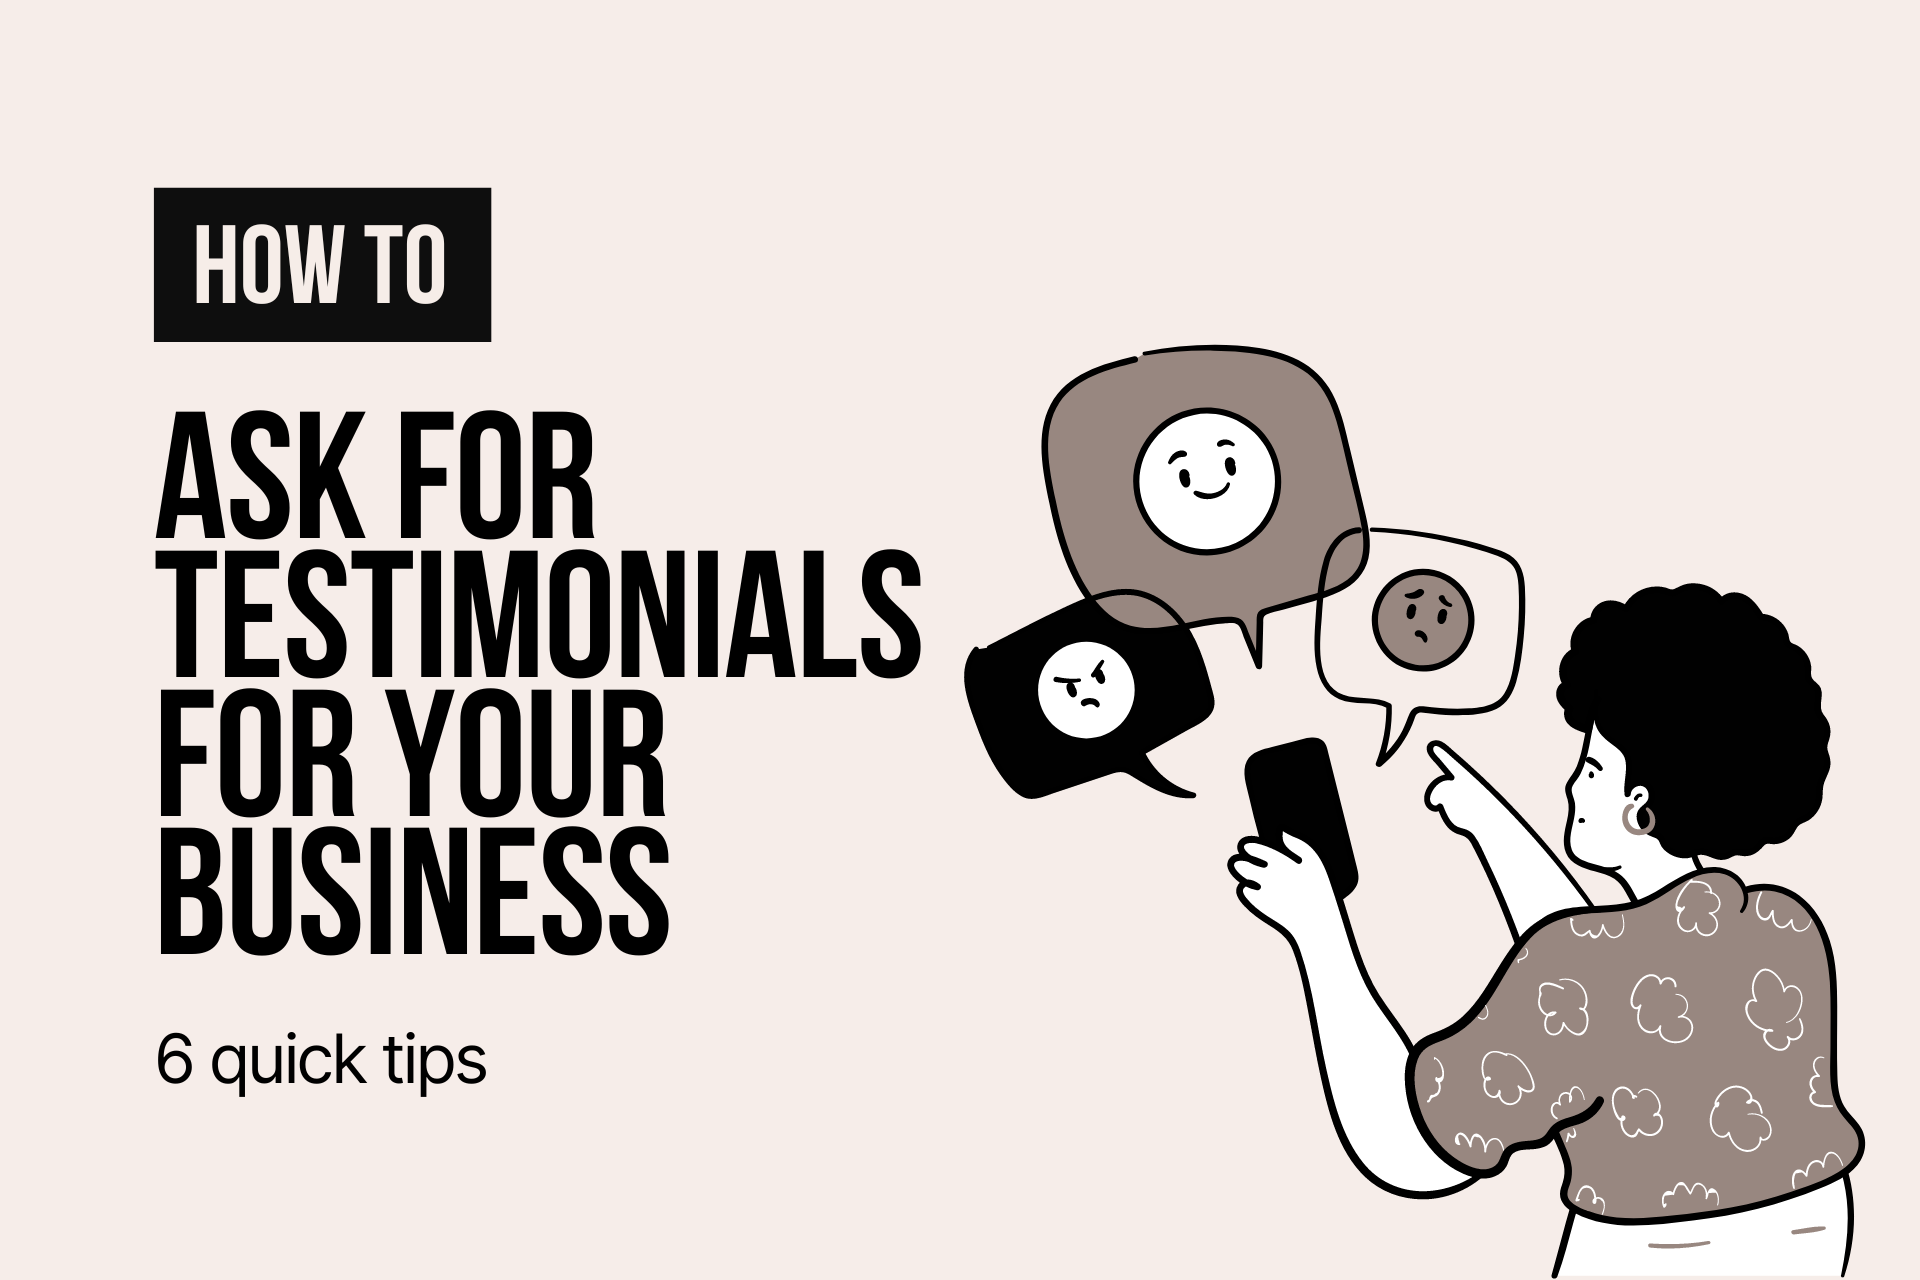 How to Ask for Testimonials for Your Business? 6 Quick Tips